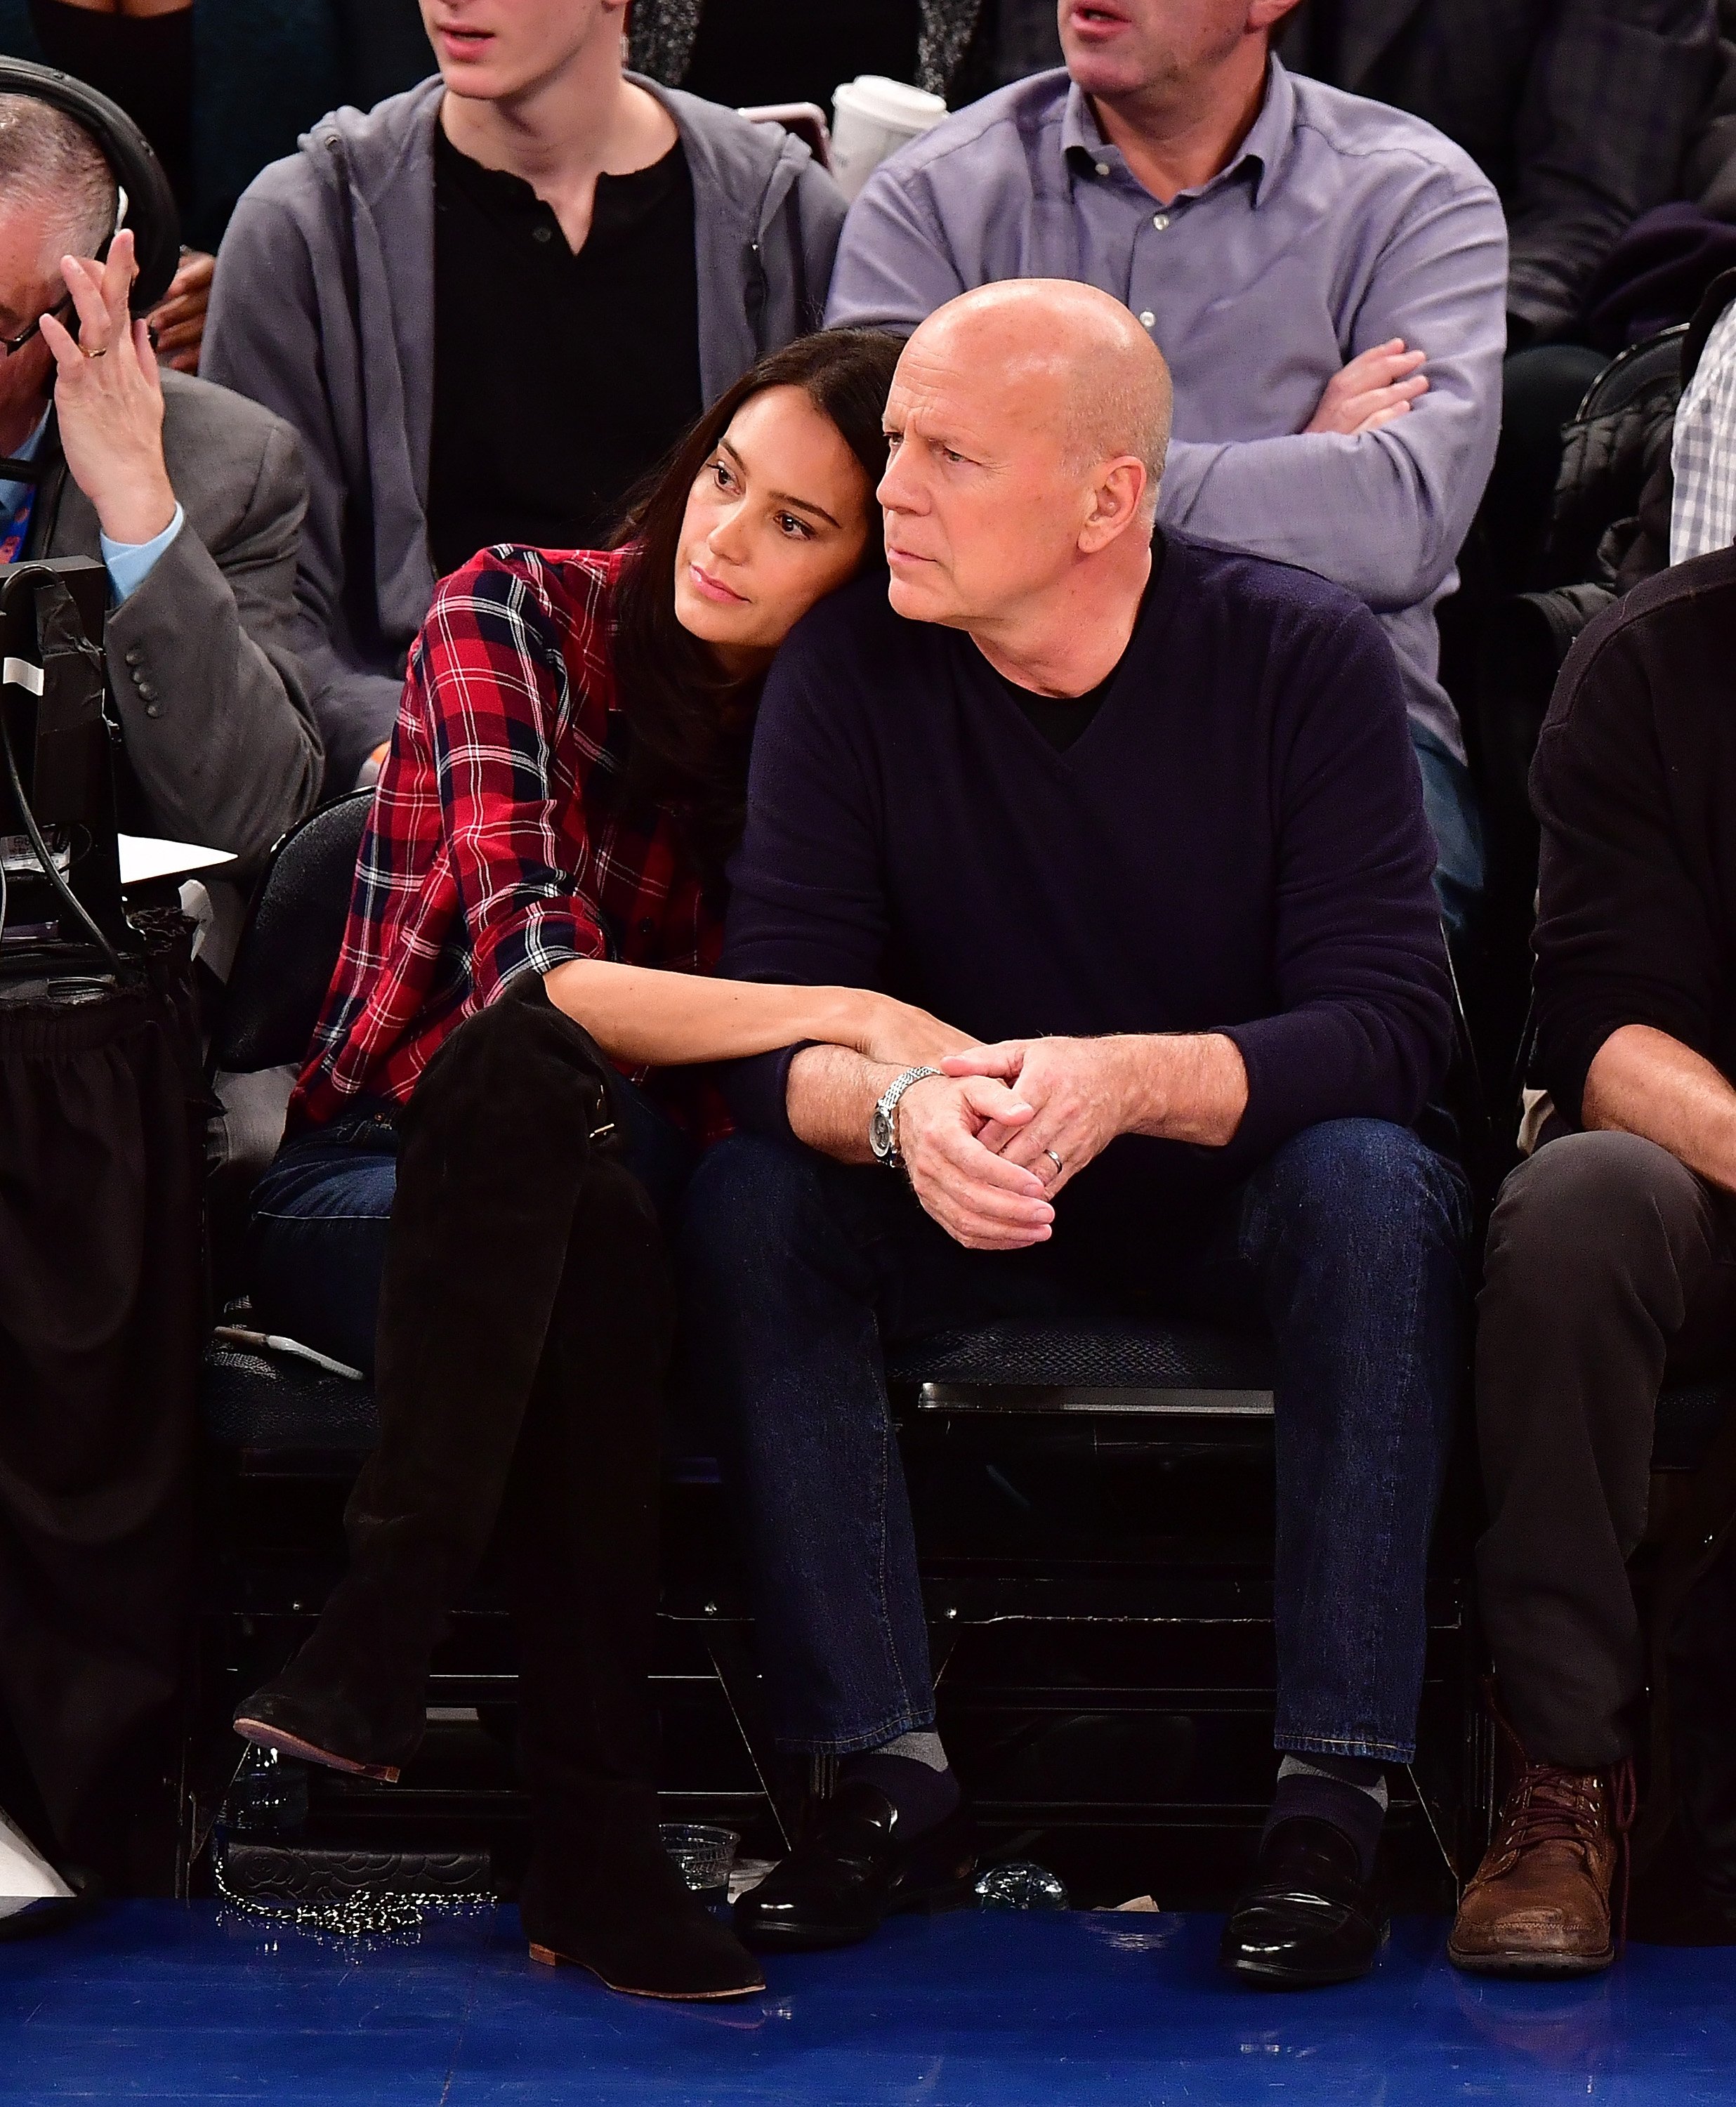 Actress Emma Heming Willis and Bruce Willis during Cleveland Cavaliers Vs. New York Knicks game at Madison Square Garden on February 4, 2017 in New York City. | Source: Getty Images